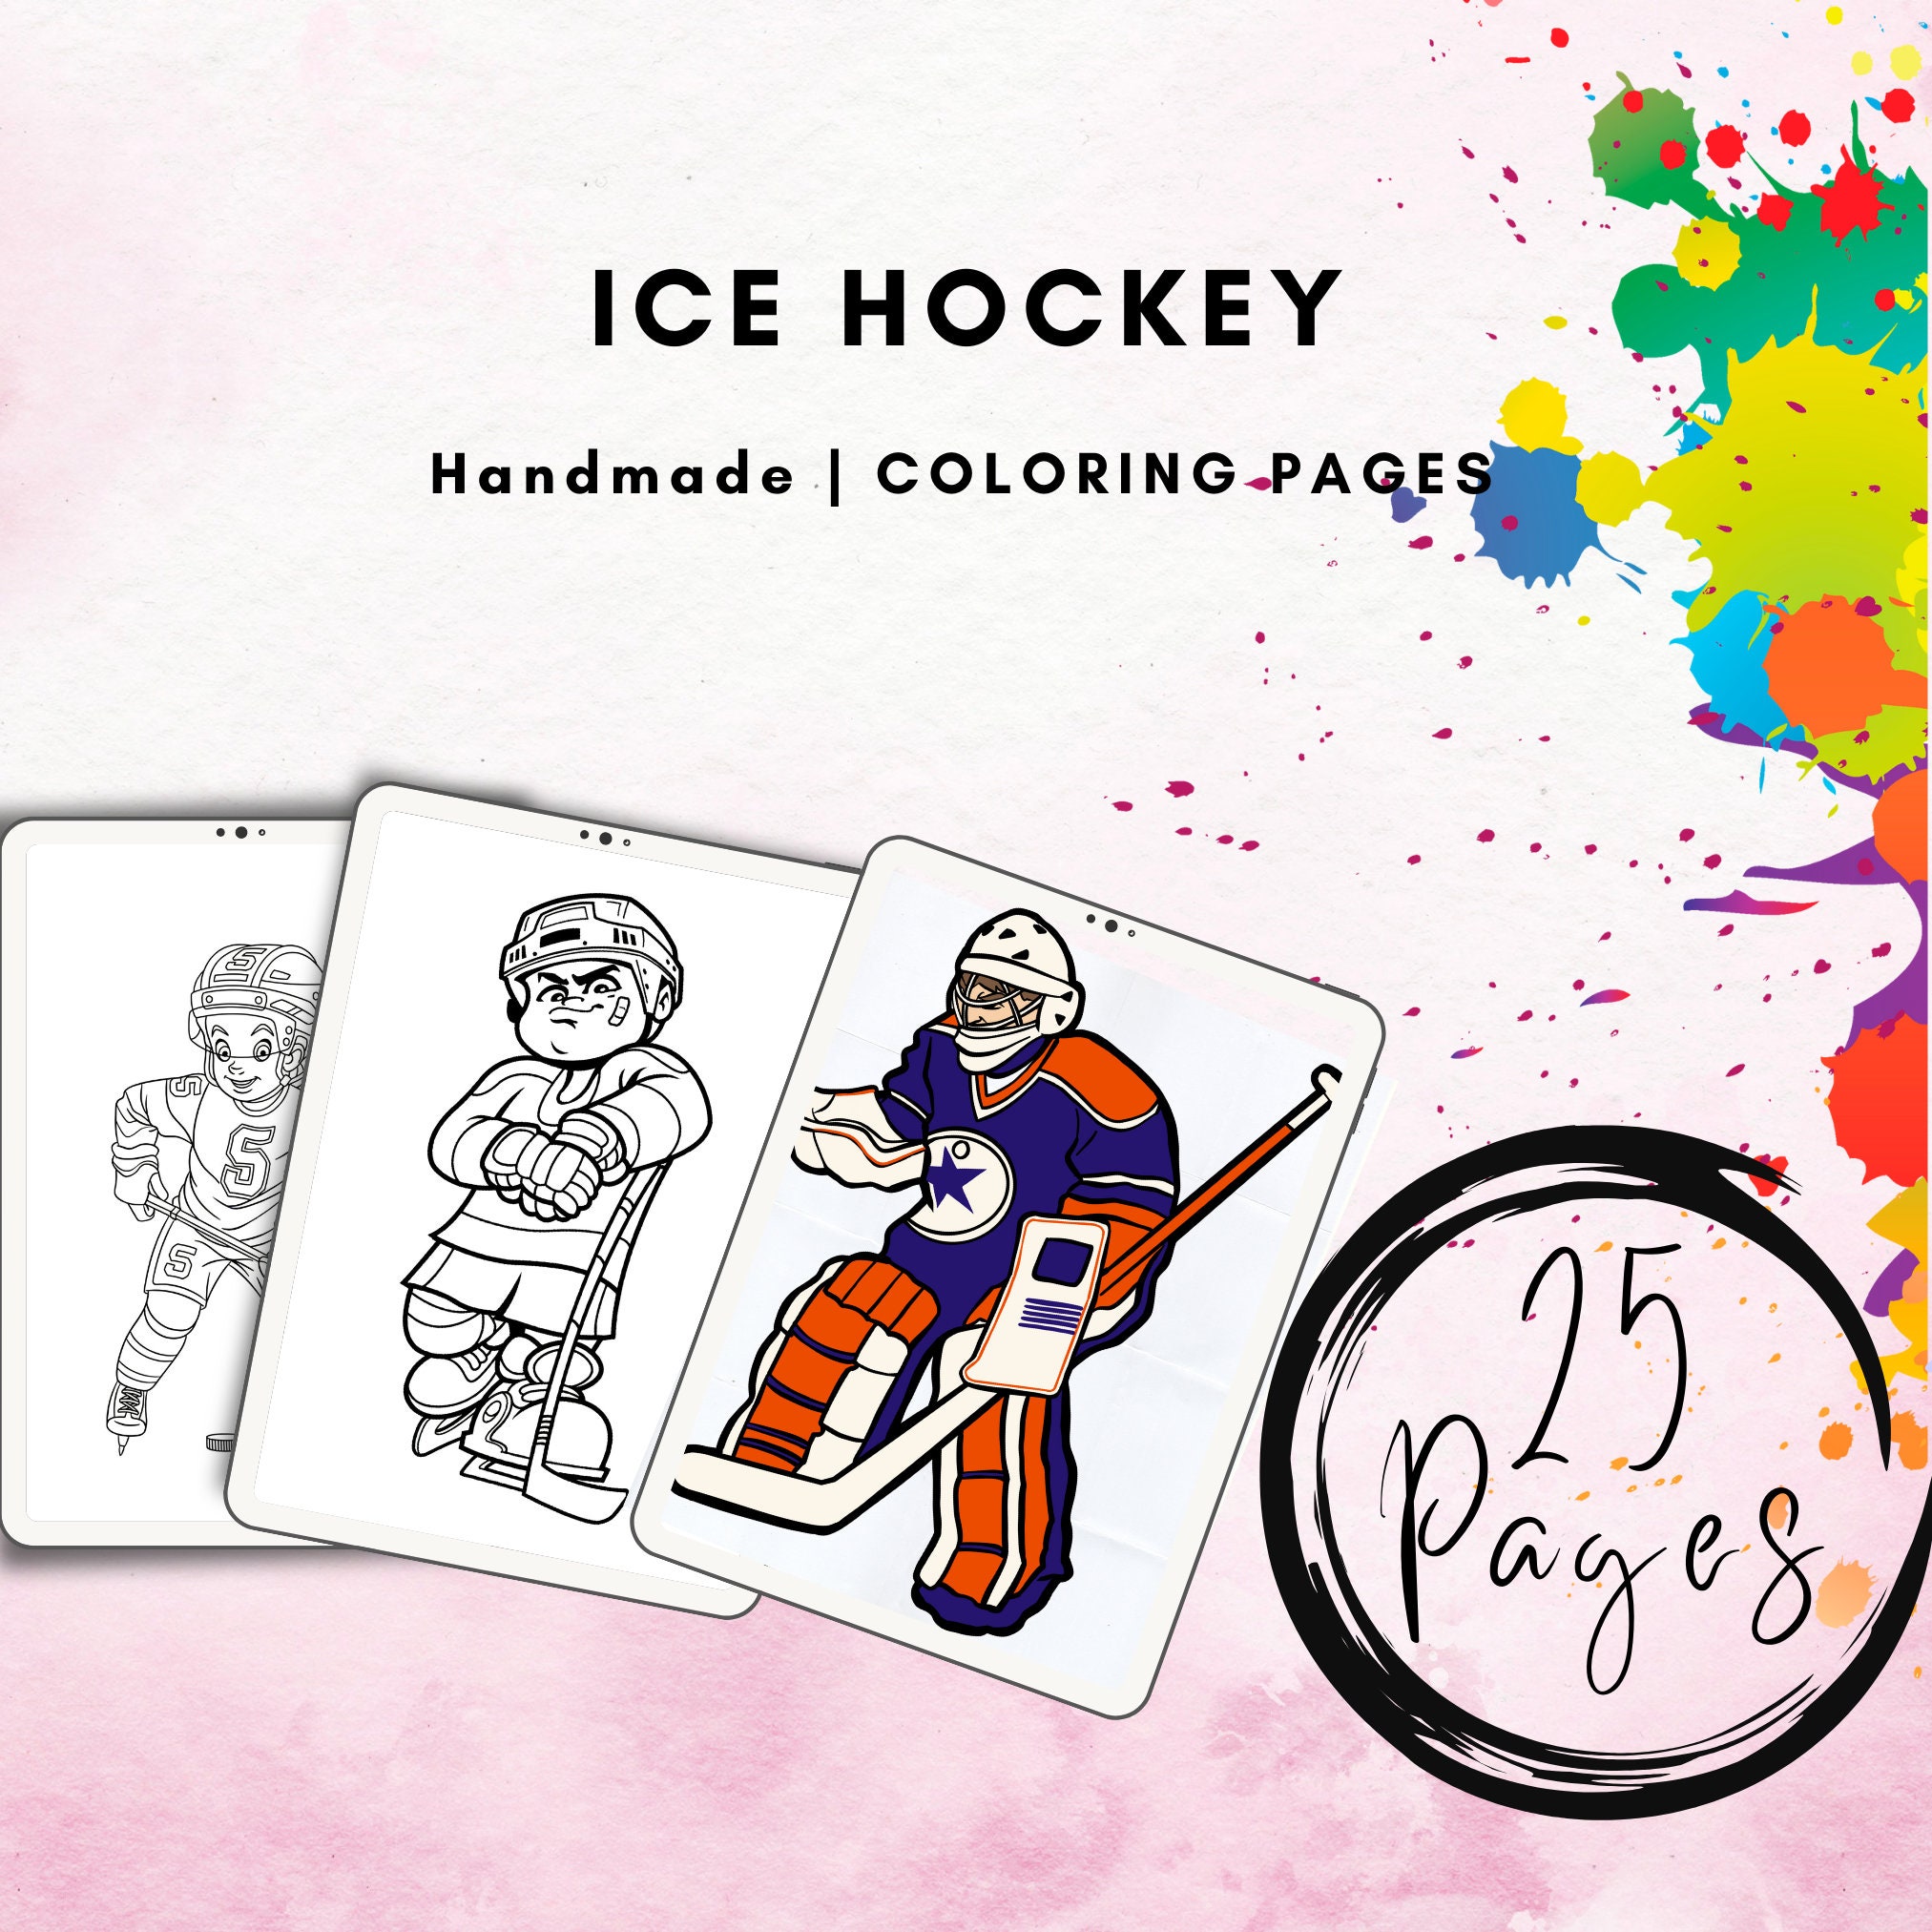 Design Your Own Vintage Goalie Mask: A Drawing and Coloring Book - 8 x 10  Full Page Templates to Design and Color For Hockey Fans of Any Age